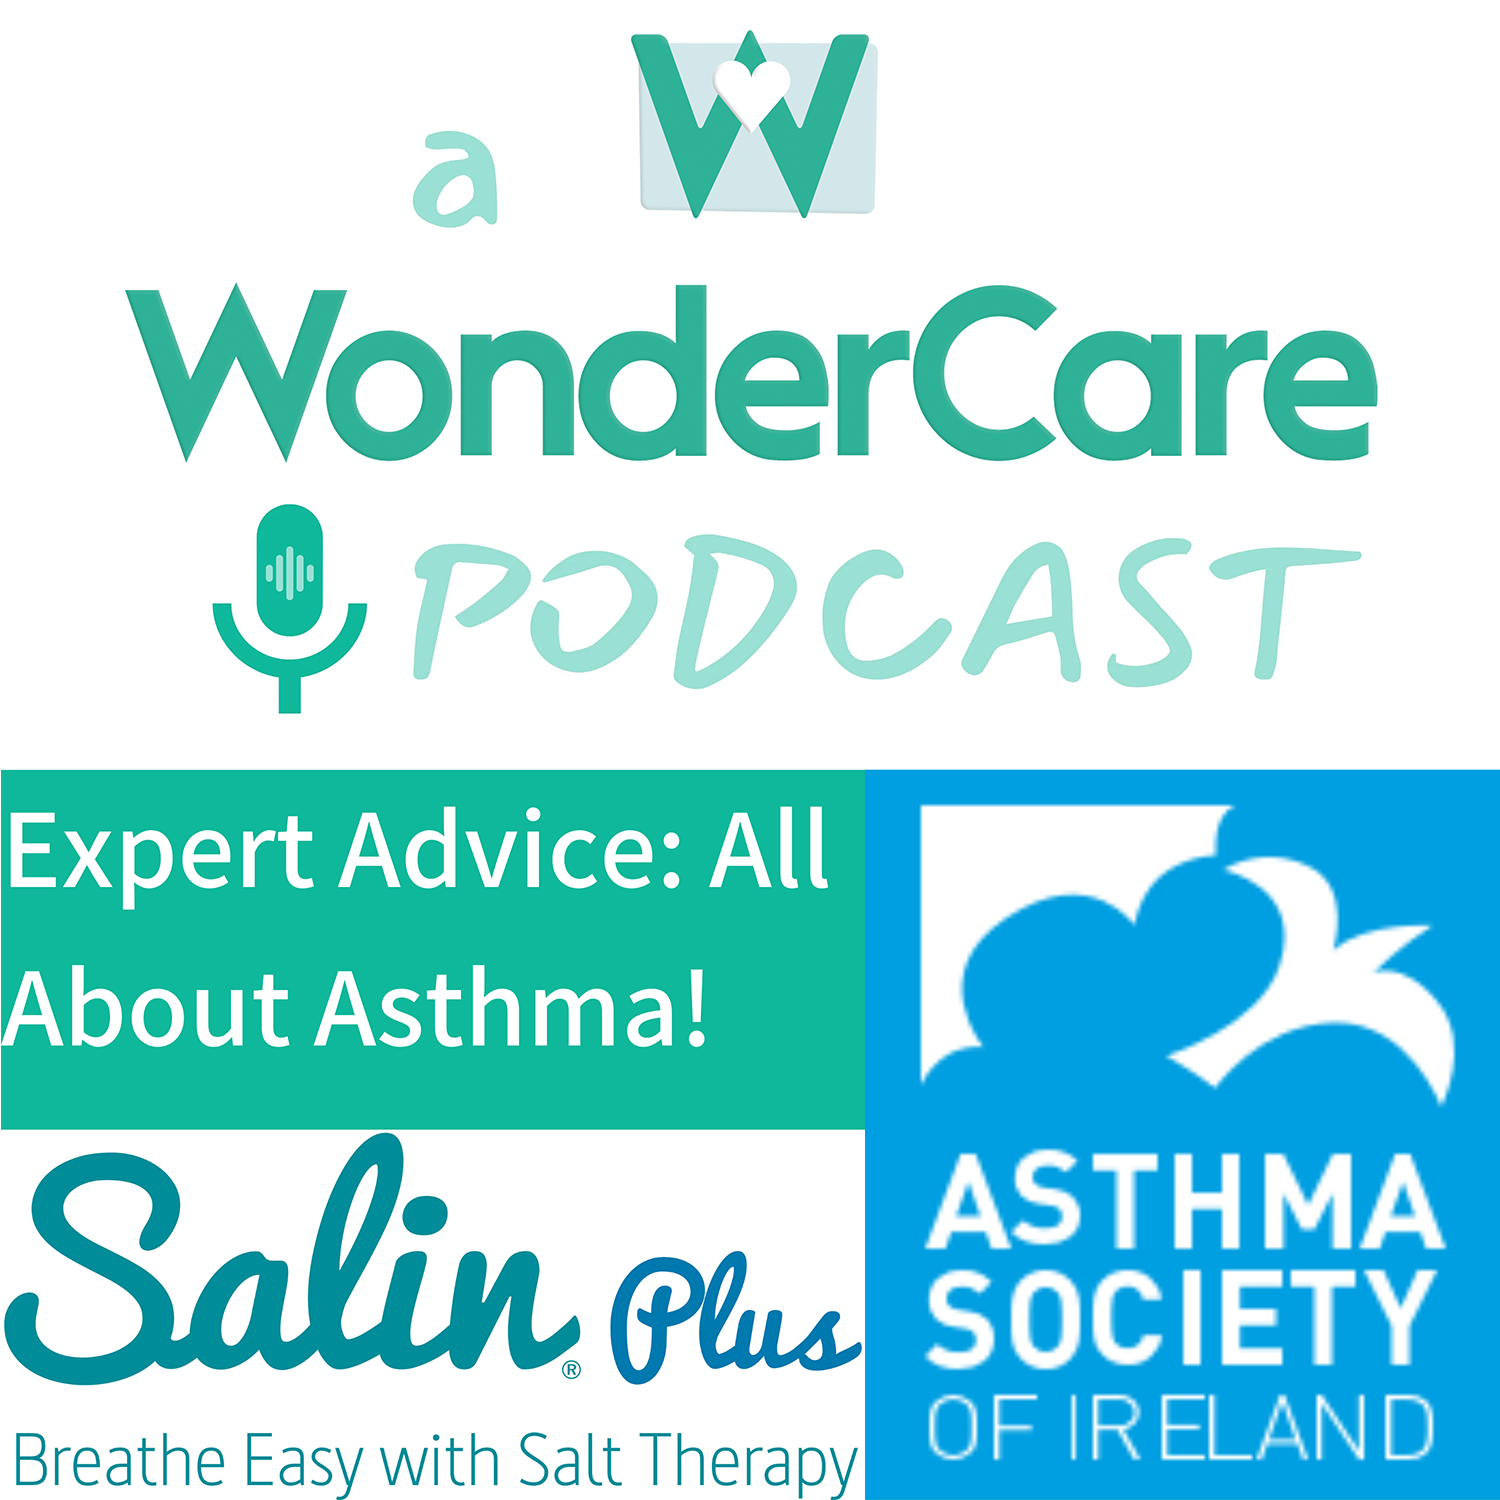 Expert Advice: All About Asthma